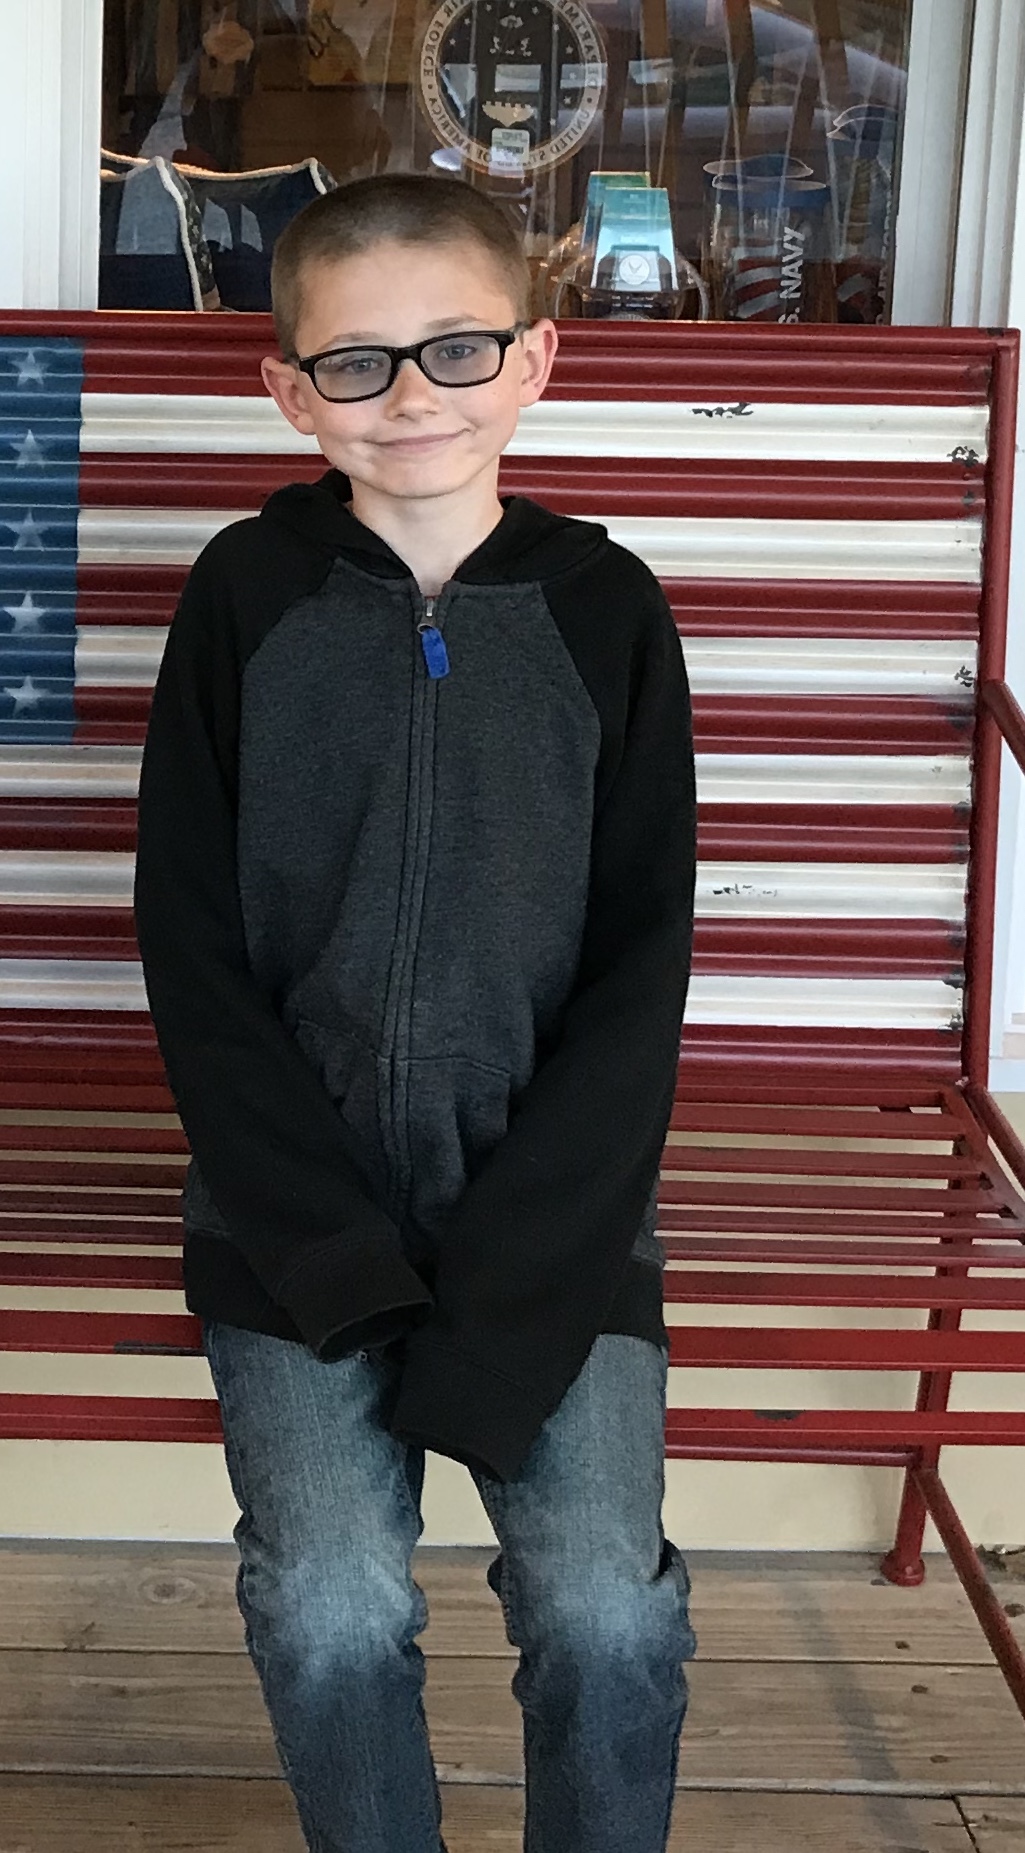 Caleb Crockett, 9, will attend this summer's National Youth Leadership Forum Pathways to STEM program at the University of Florida. Courtesy photo